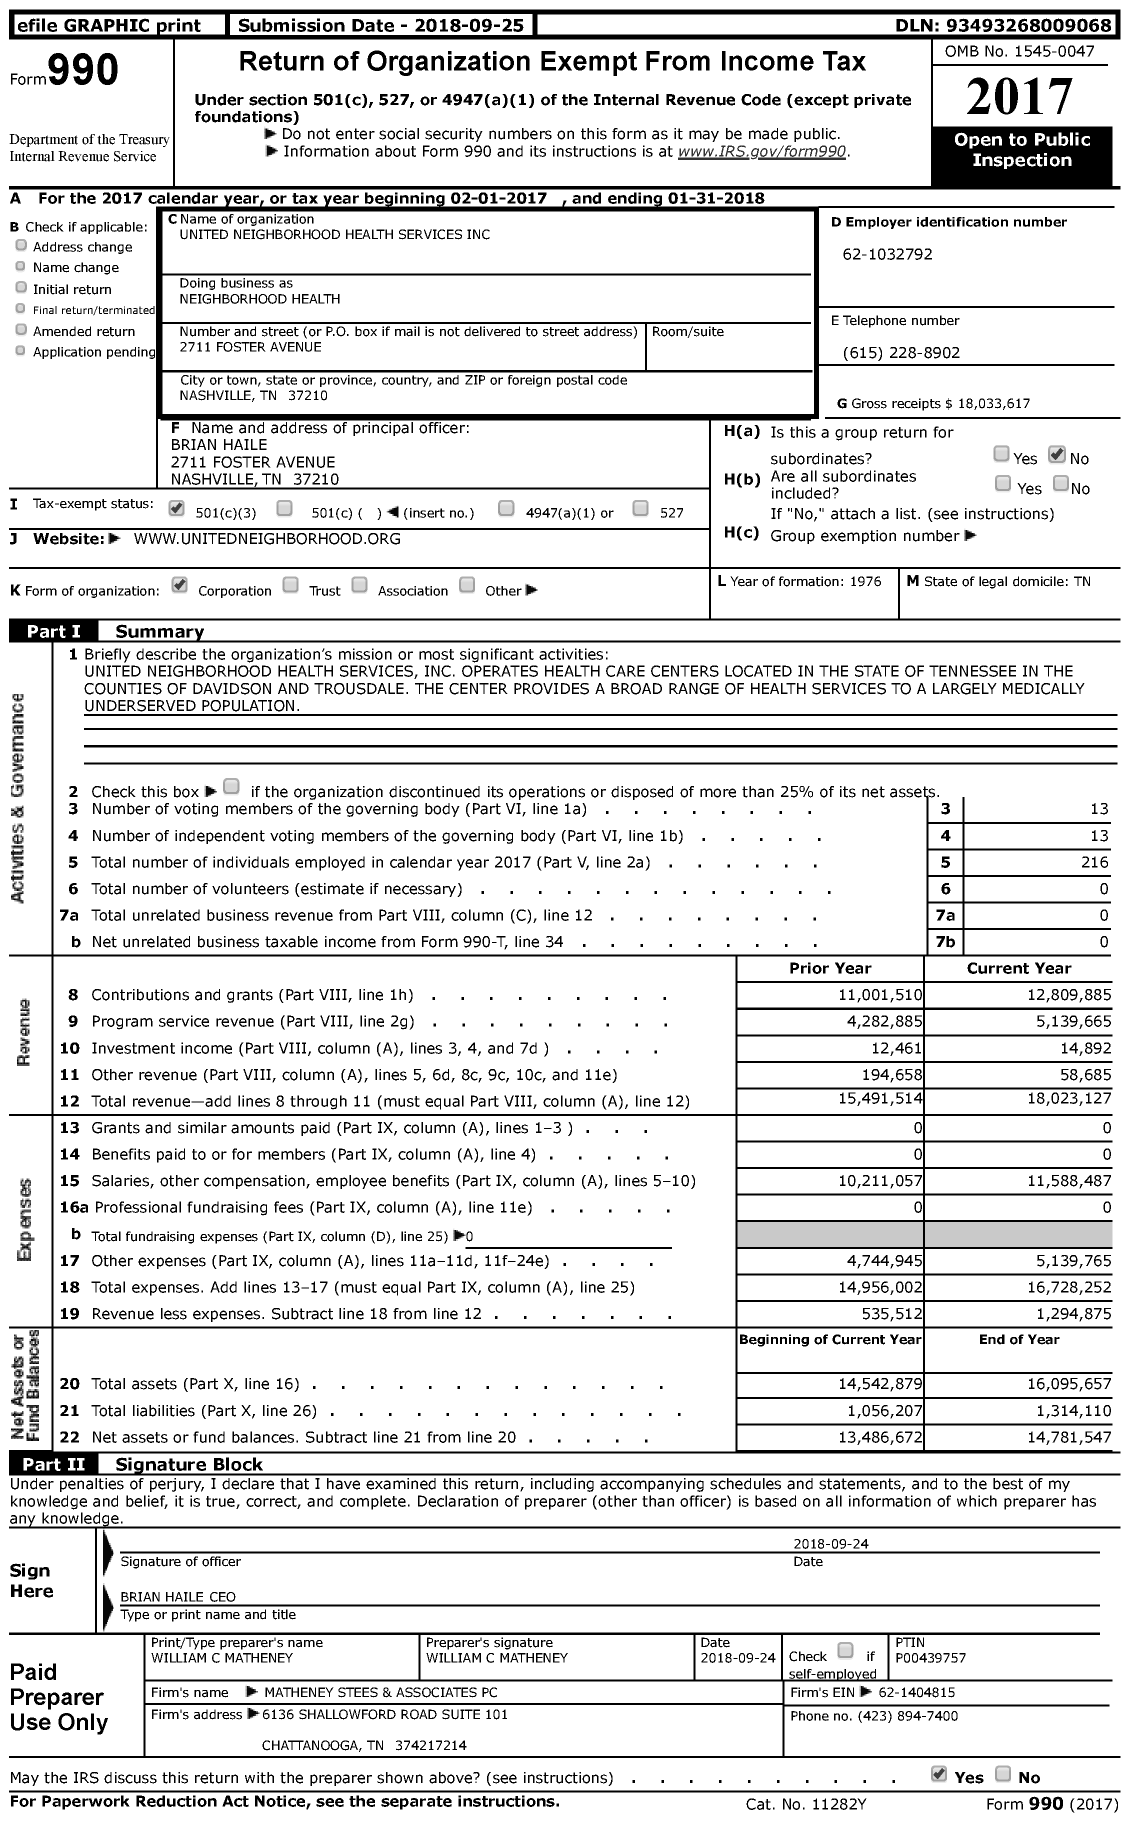 Image of first page of 2017 Form 990 for Neighborhood Health / United Neighborhood Health Services Inc